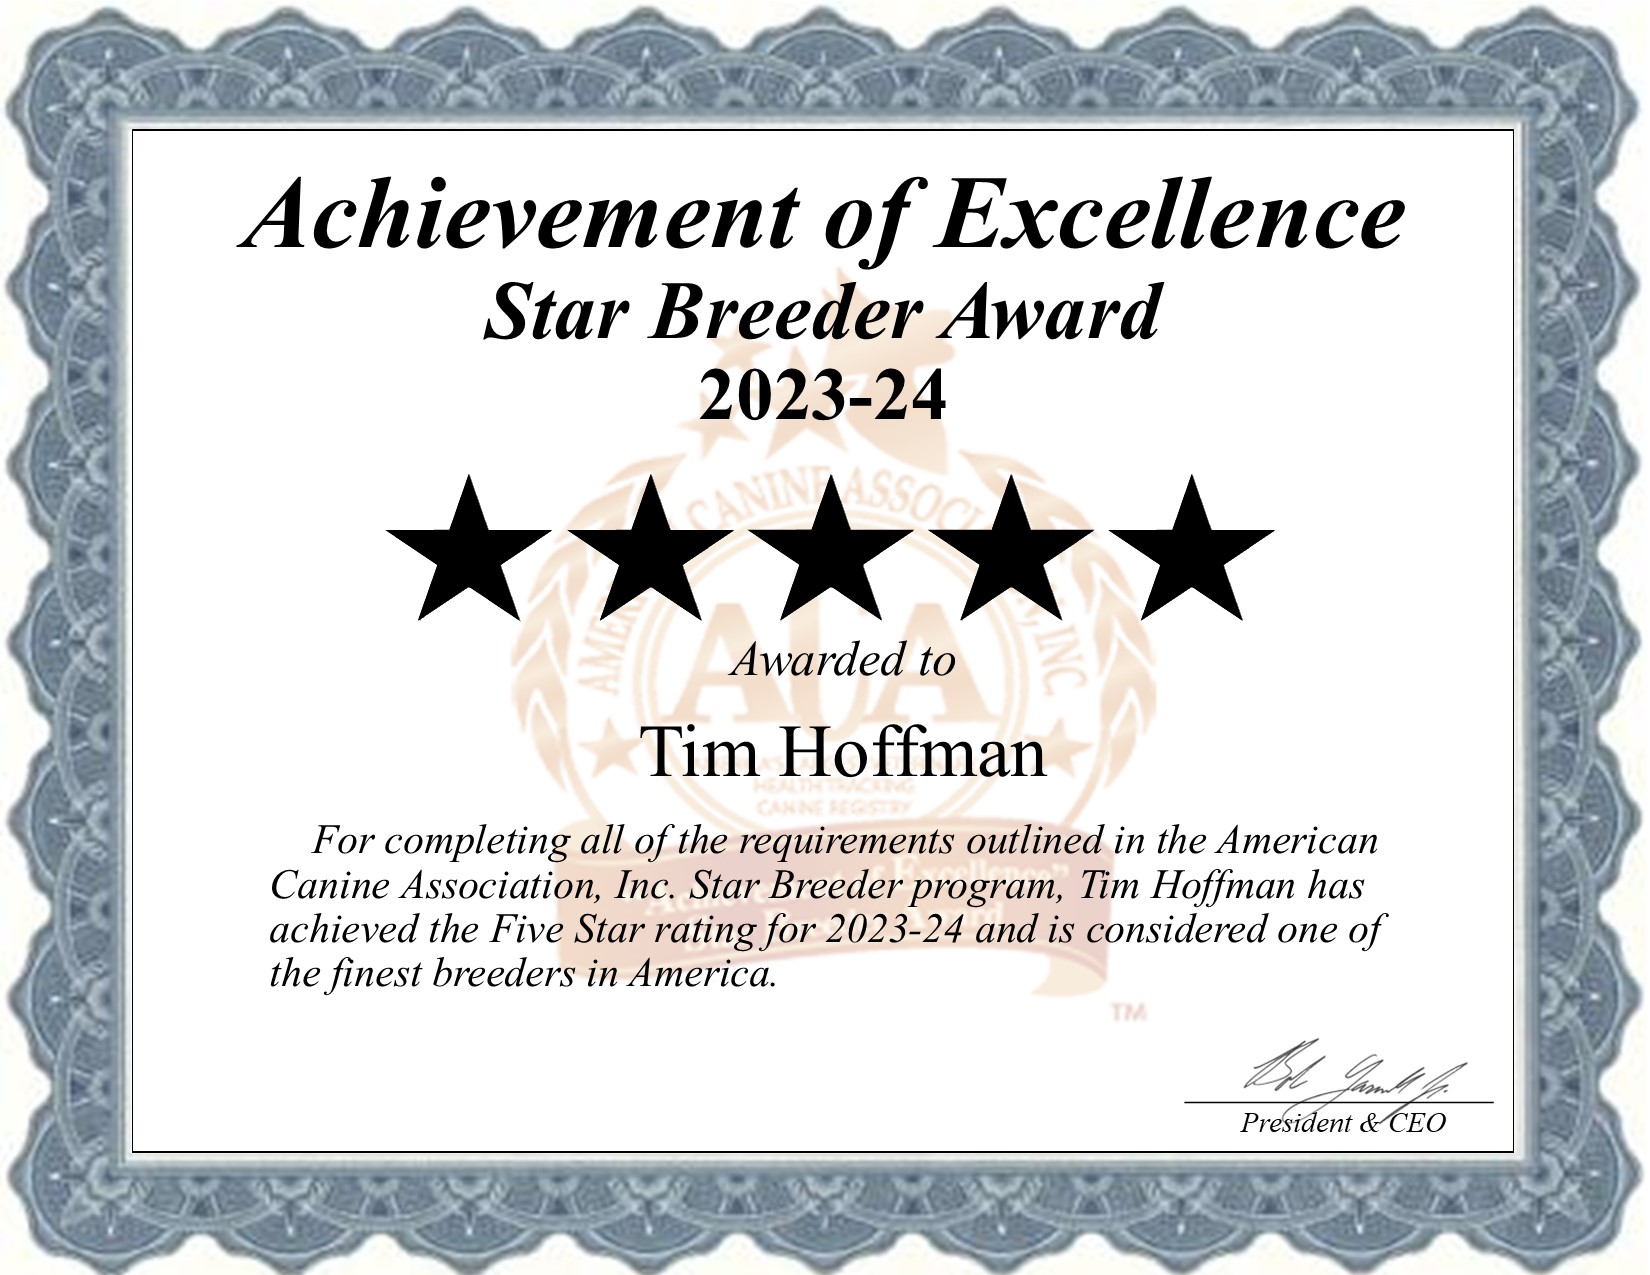 Tim, Hoffman, dog, breeder, star, certificate, Tim-Hoffman, Vincent, OH, Ohio, puppy, dog, kennels, mill, puppymill, usda, 5-star, aca, ica, registered, Toy Poodle, none